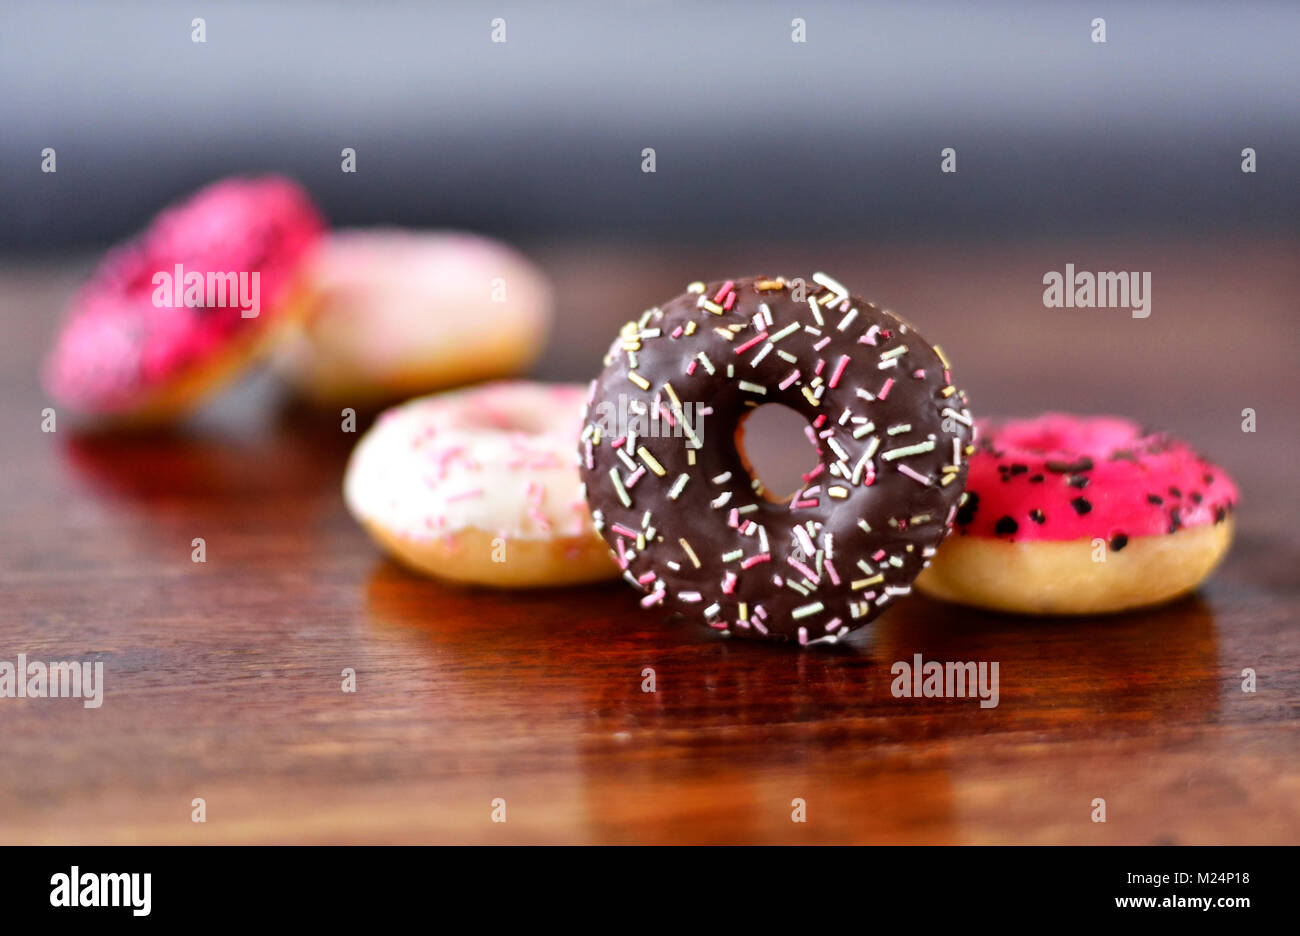 delicious chocolate donuts or fresh donut with glaze or icing and sprinkles. Variation or arrangement of sweet food on a wooden table.Unhealthy eating Stock Photo